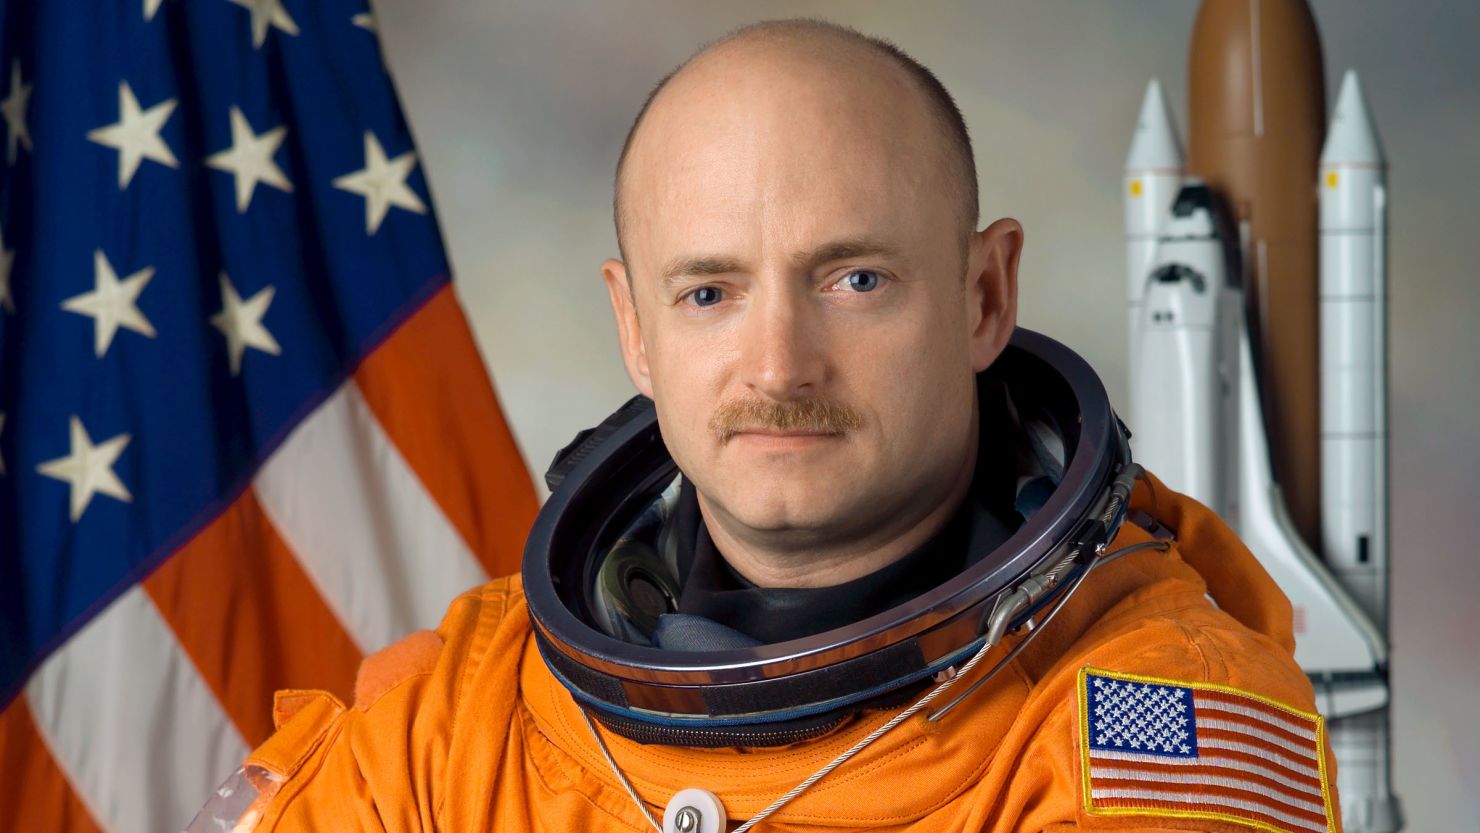 "This was not an easy decision," Mark Kelly wrote on his Facebook page when he announced he was retiring.